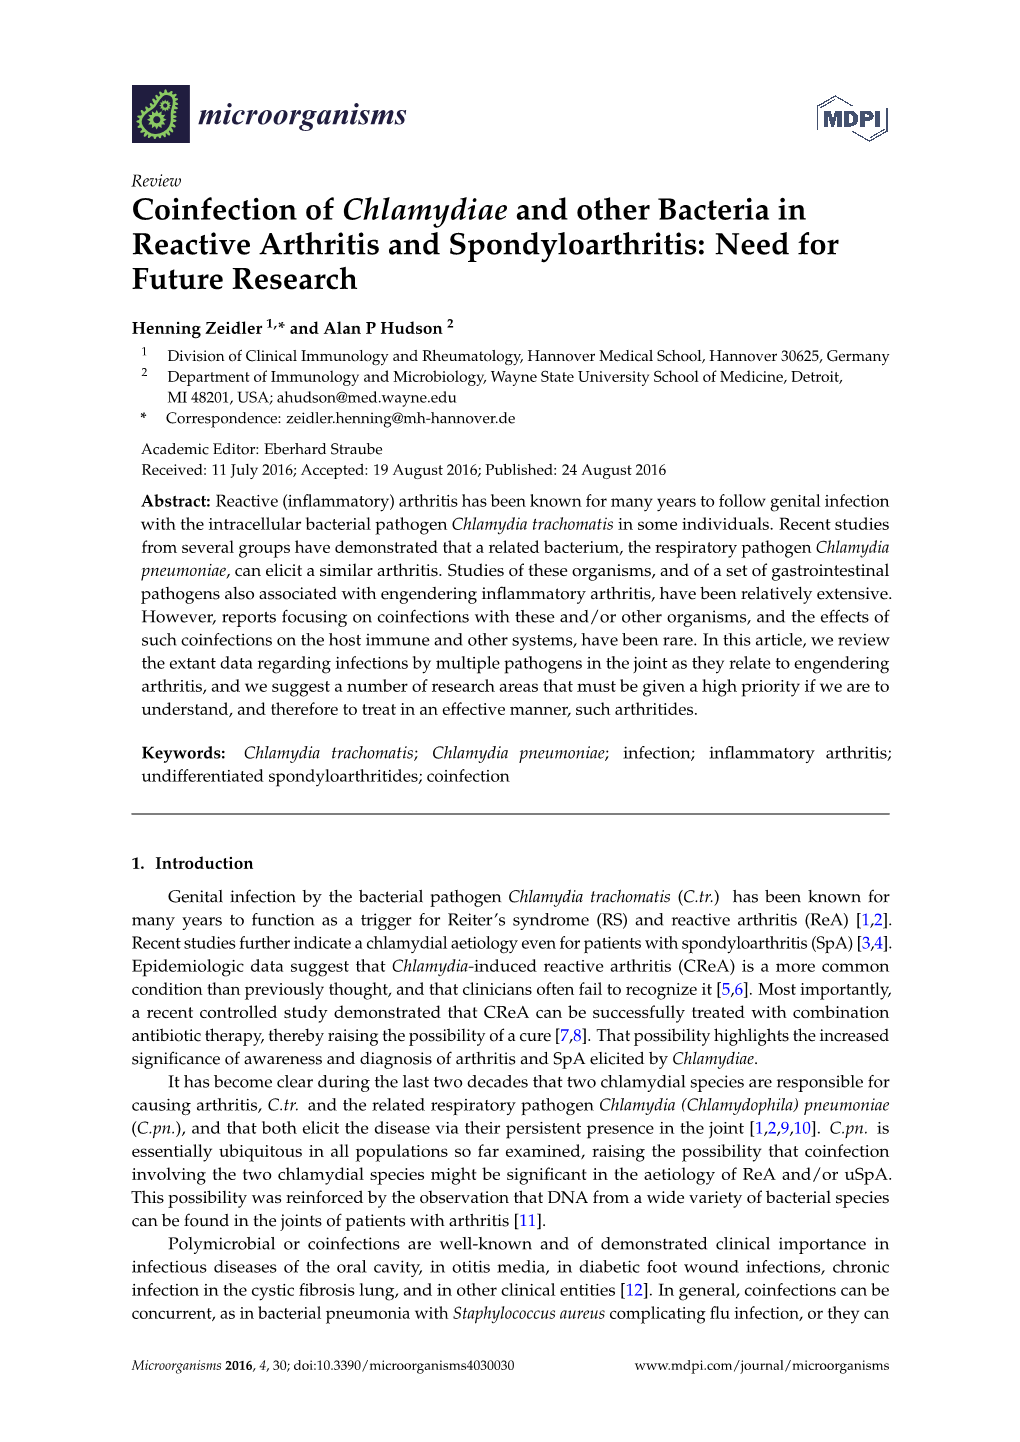 Coinfection of Chlamydiae and Other Bacteria in Reactive Arthritis and Spondyloarthritis: Need for Future Research